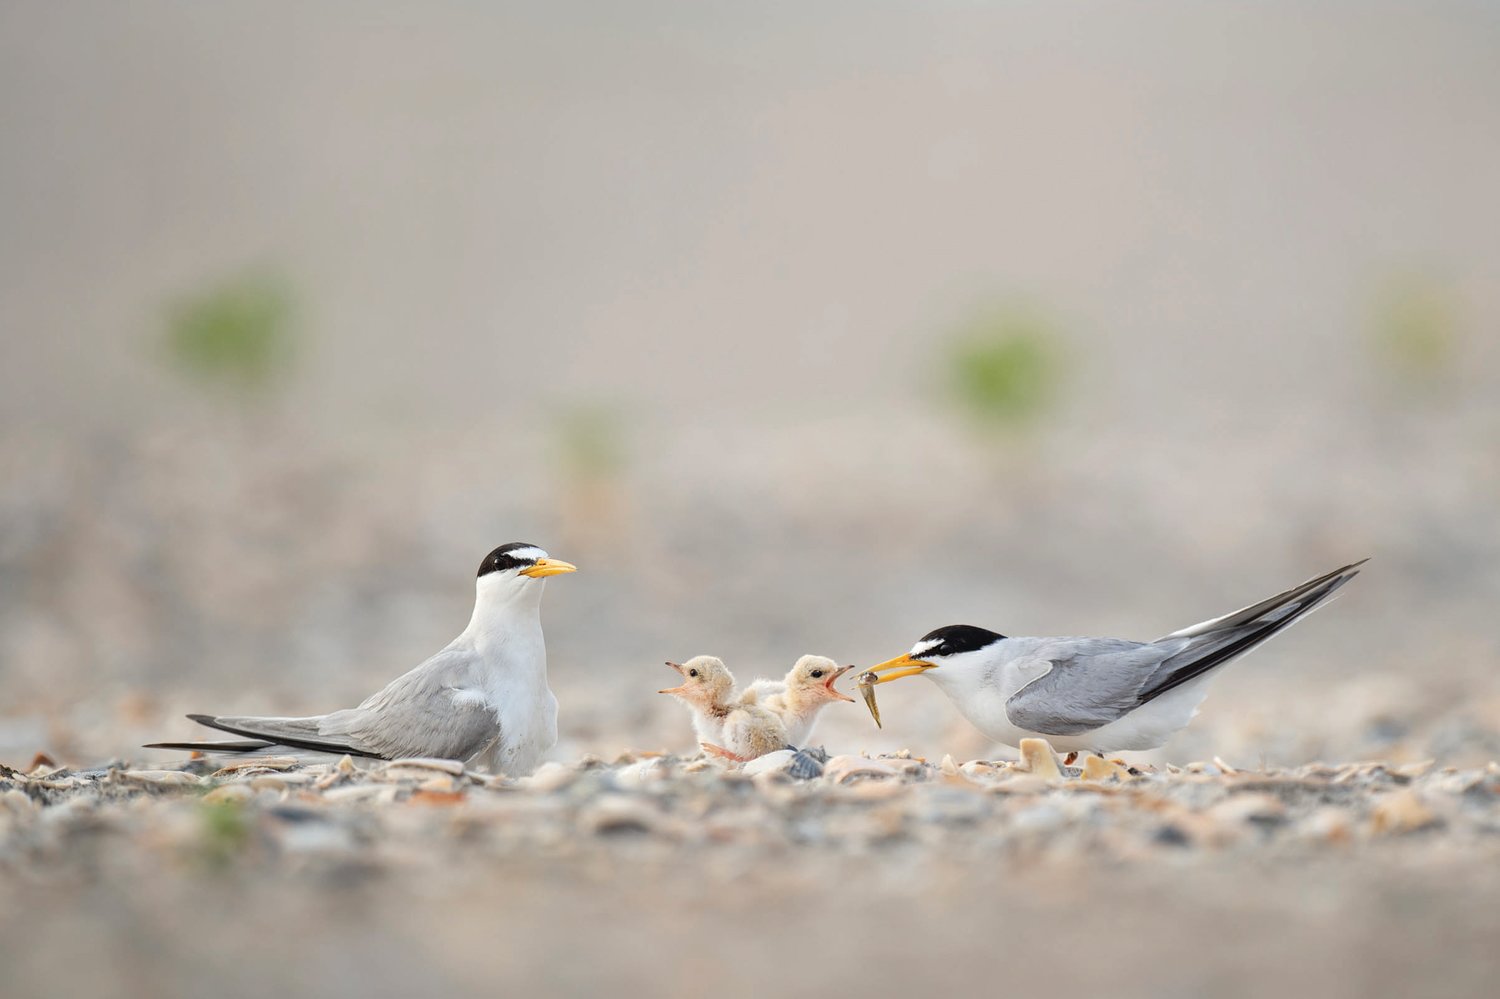 A pair of Least Tern adults feed their chicks a small minnow on a sandy beach.